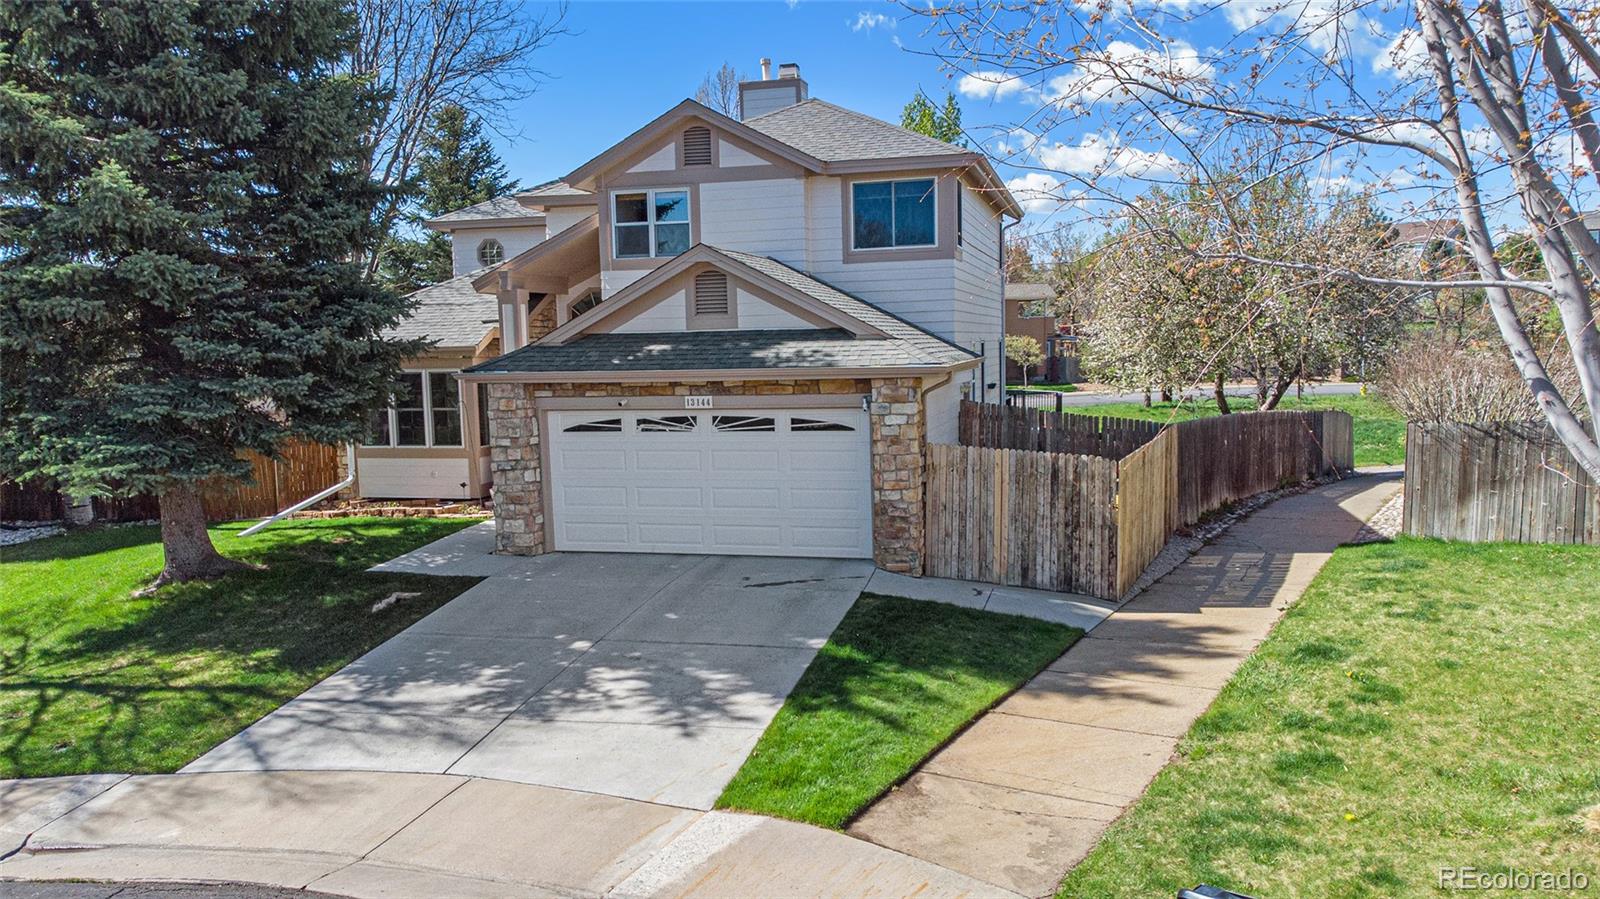 13144 W 85th Place, arvada MLS: 2436450 Beds: 4 Baths: 3 Price: $800,000